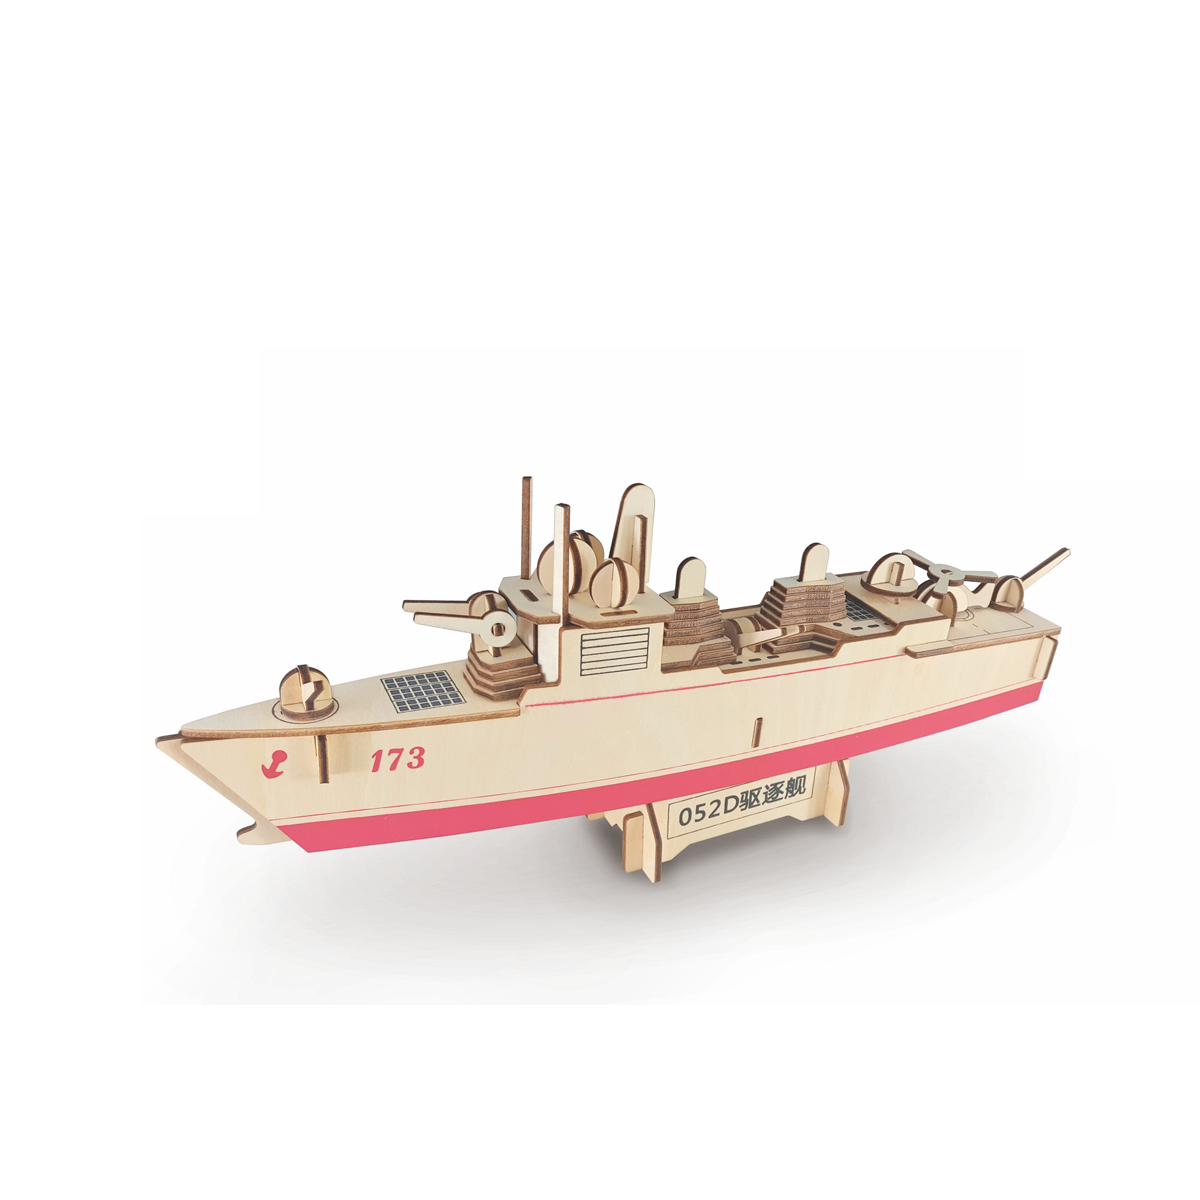 3D-Woodcraft-Assembly-Battleship-Series-Kit-Jigsaw-Puzzle-Toy-Decoration-Model-for-Kids-Gift-1632733-3